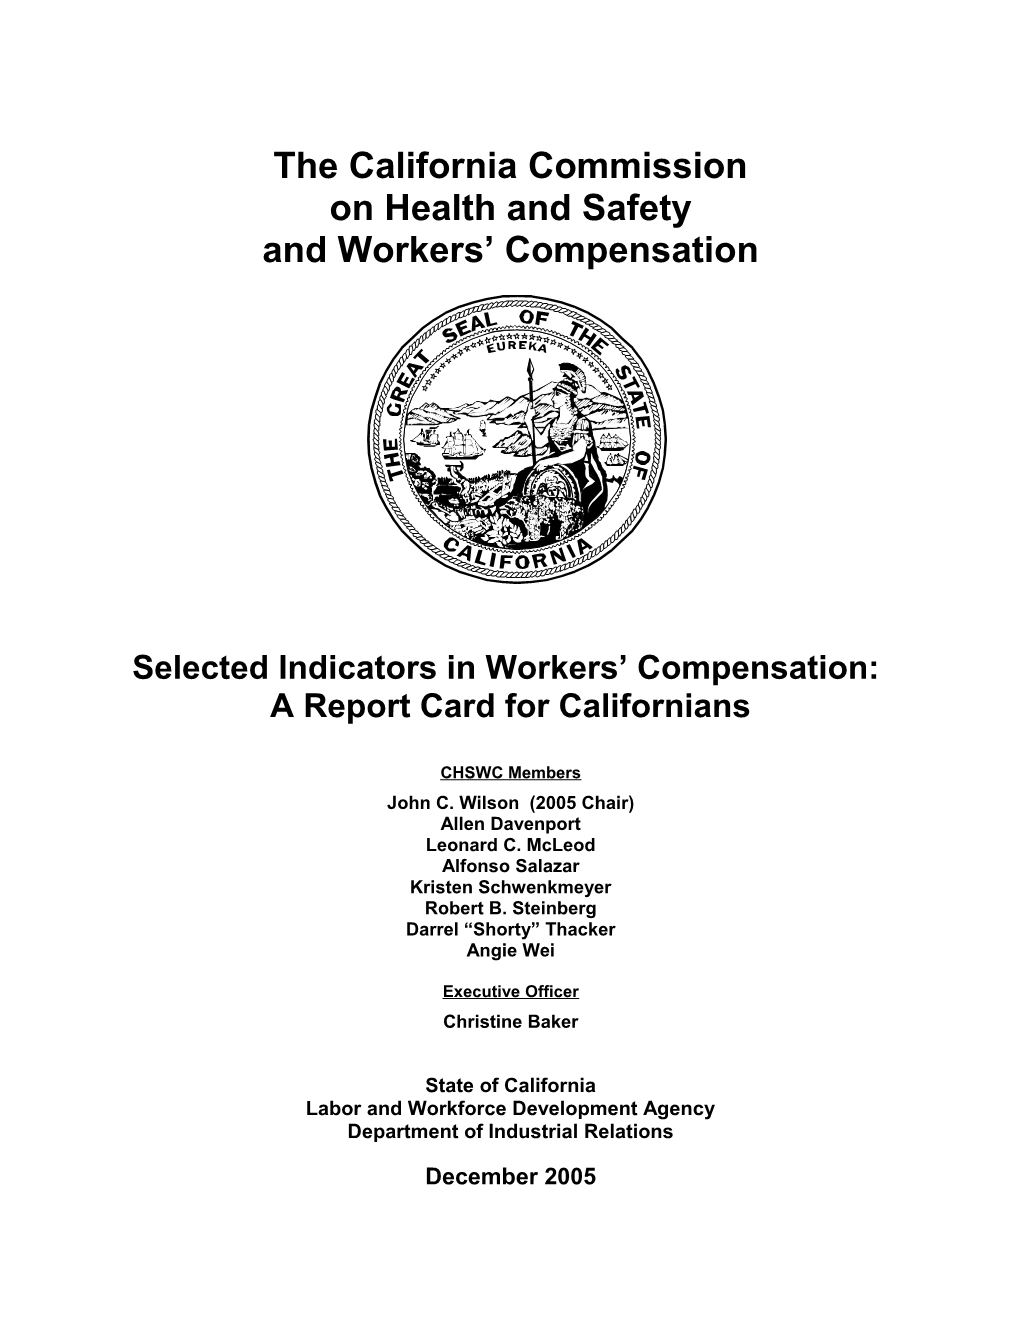 Principal Indicators in Workers Compensation: a Report Card for Californians